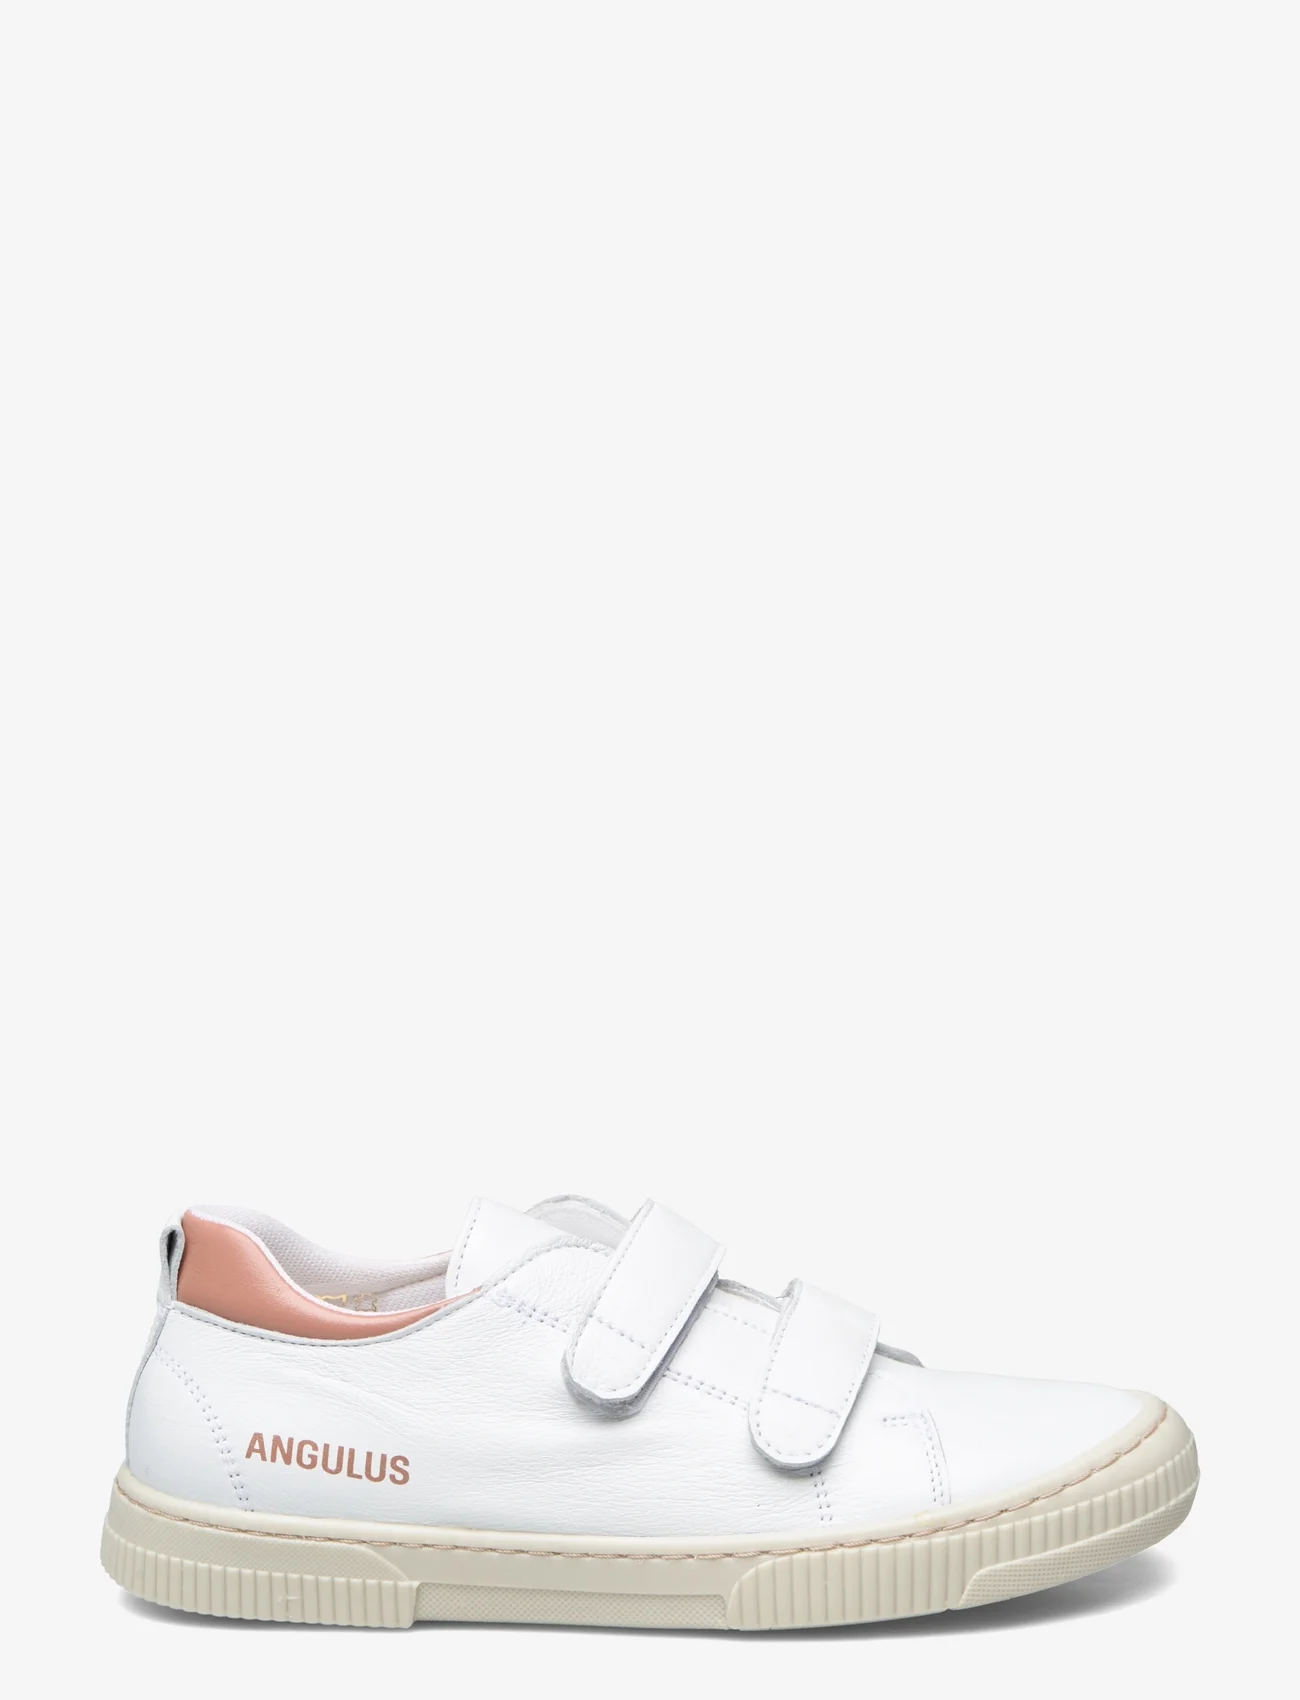 ANGULUS - Shoes - flat - with velcro - sommerschnäppchen - 1521/1470 white/d.peach - 1